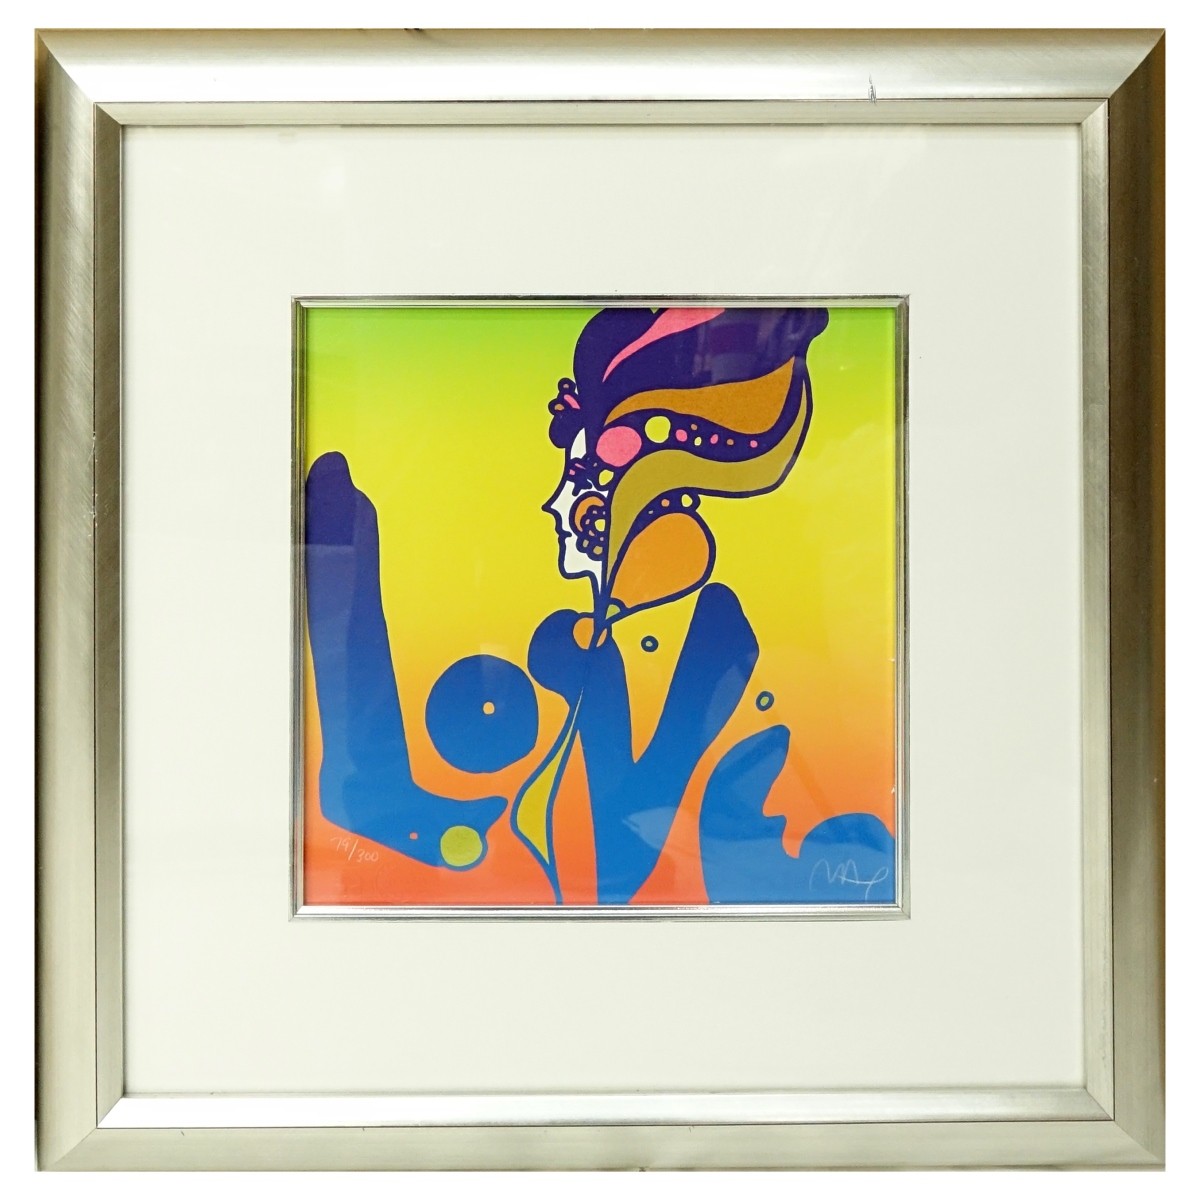 Peter Max, America (born 1937) Lithograph on Paper